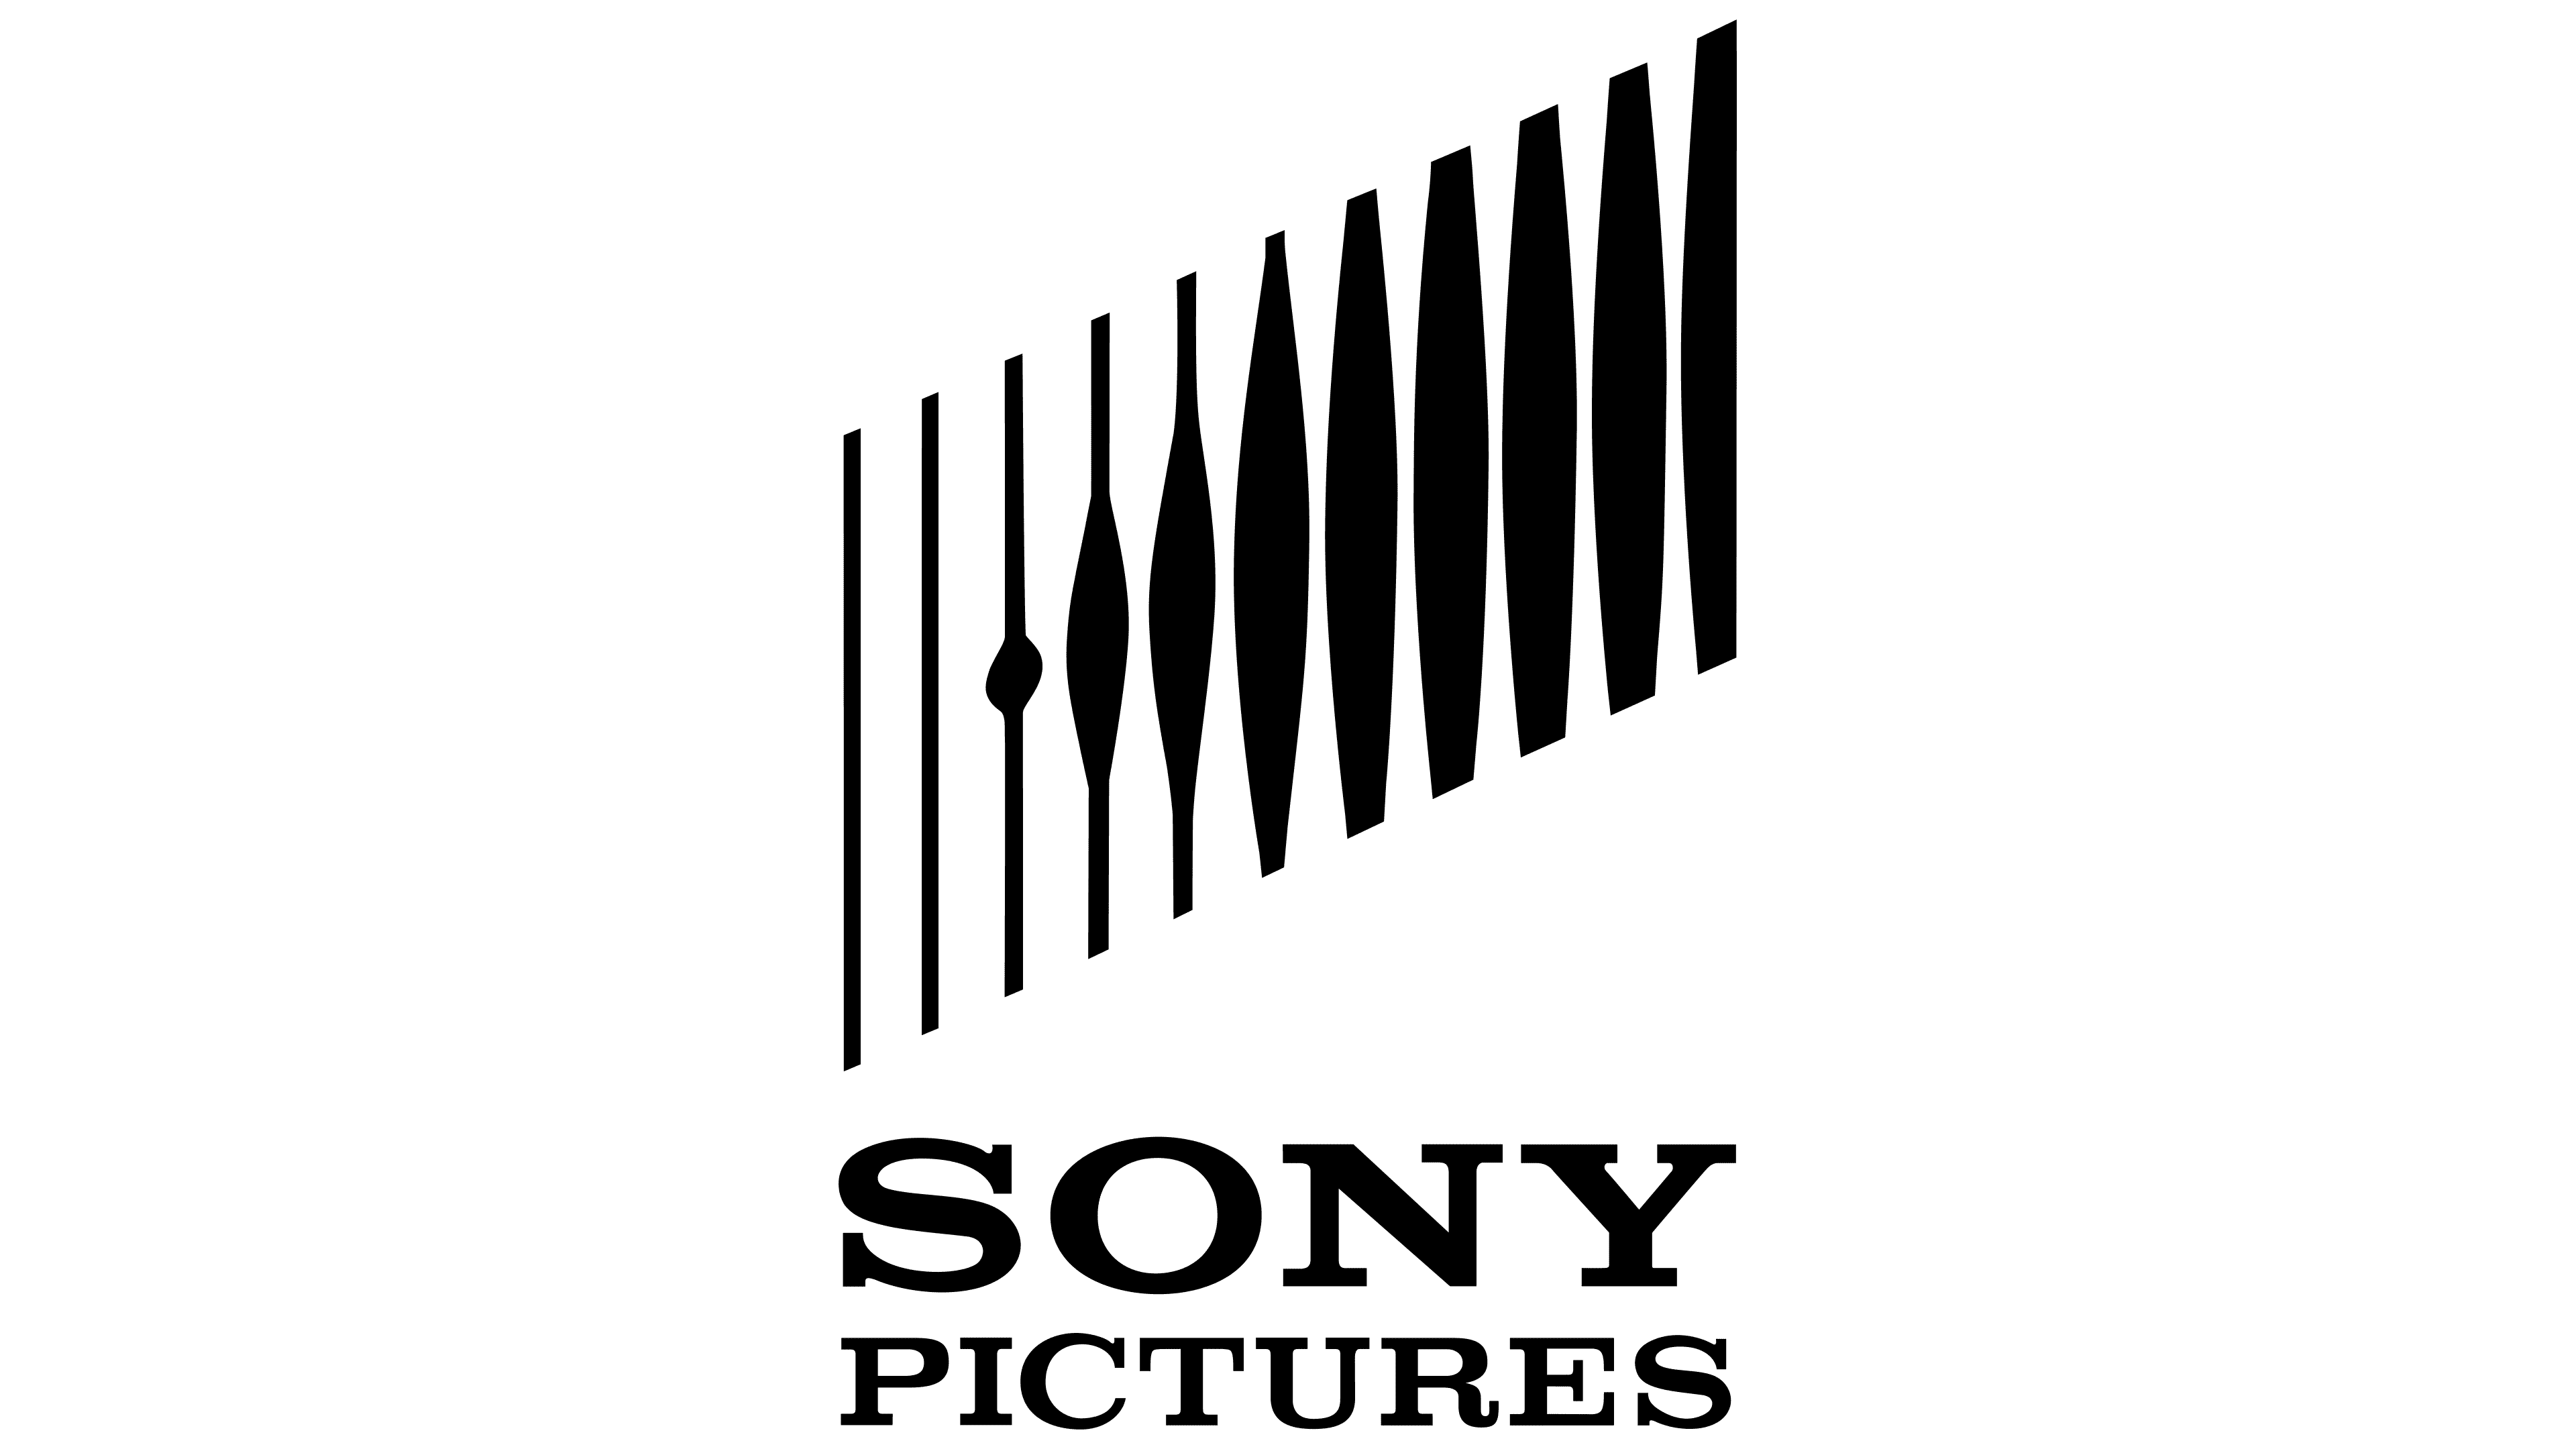 Sony Logo Symbol Meaning History Png Brand